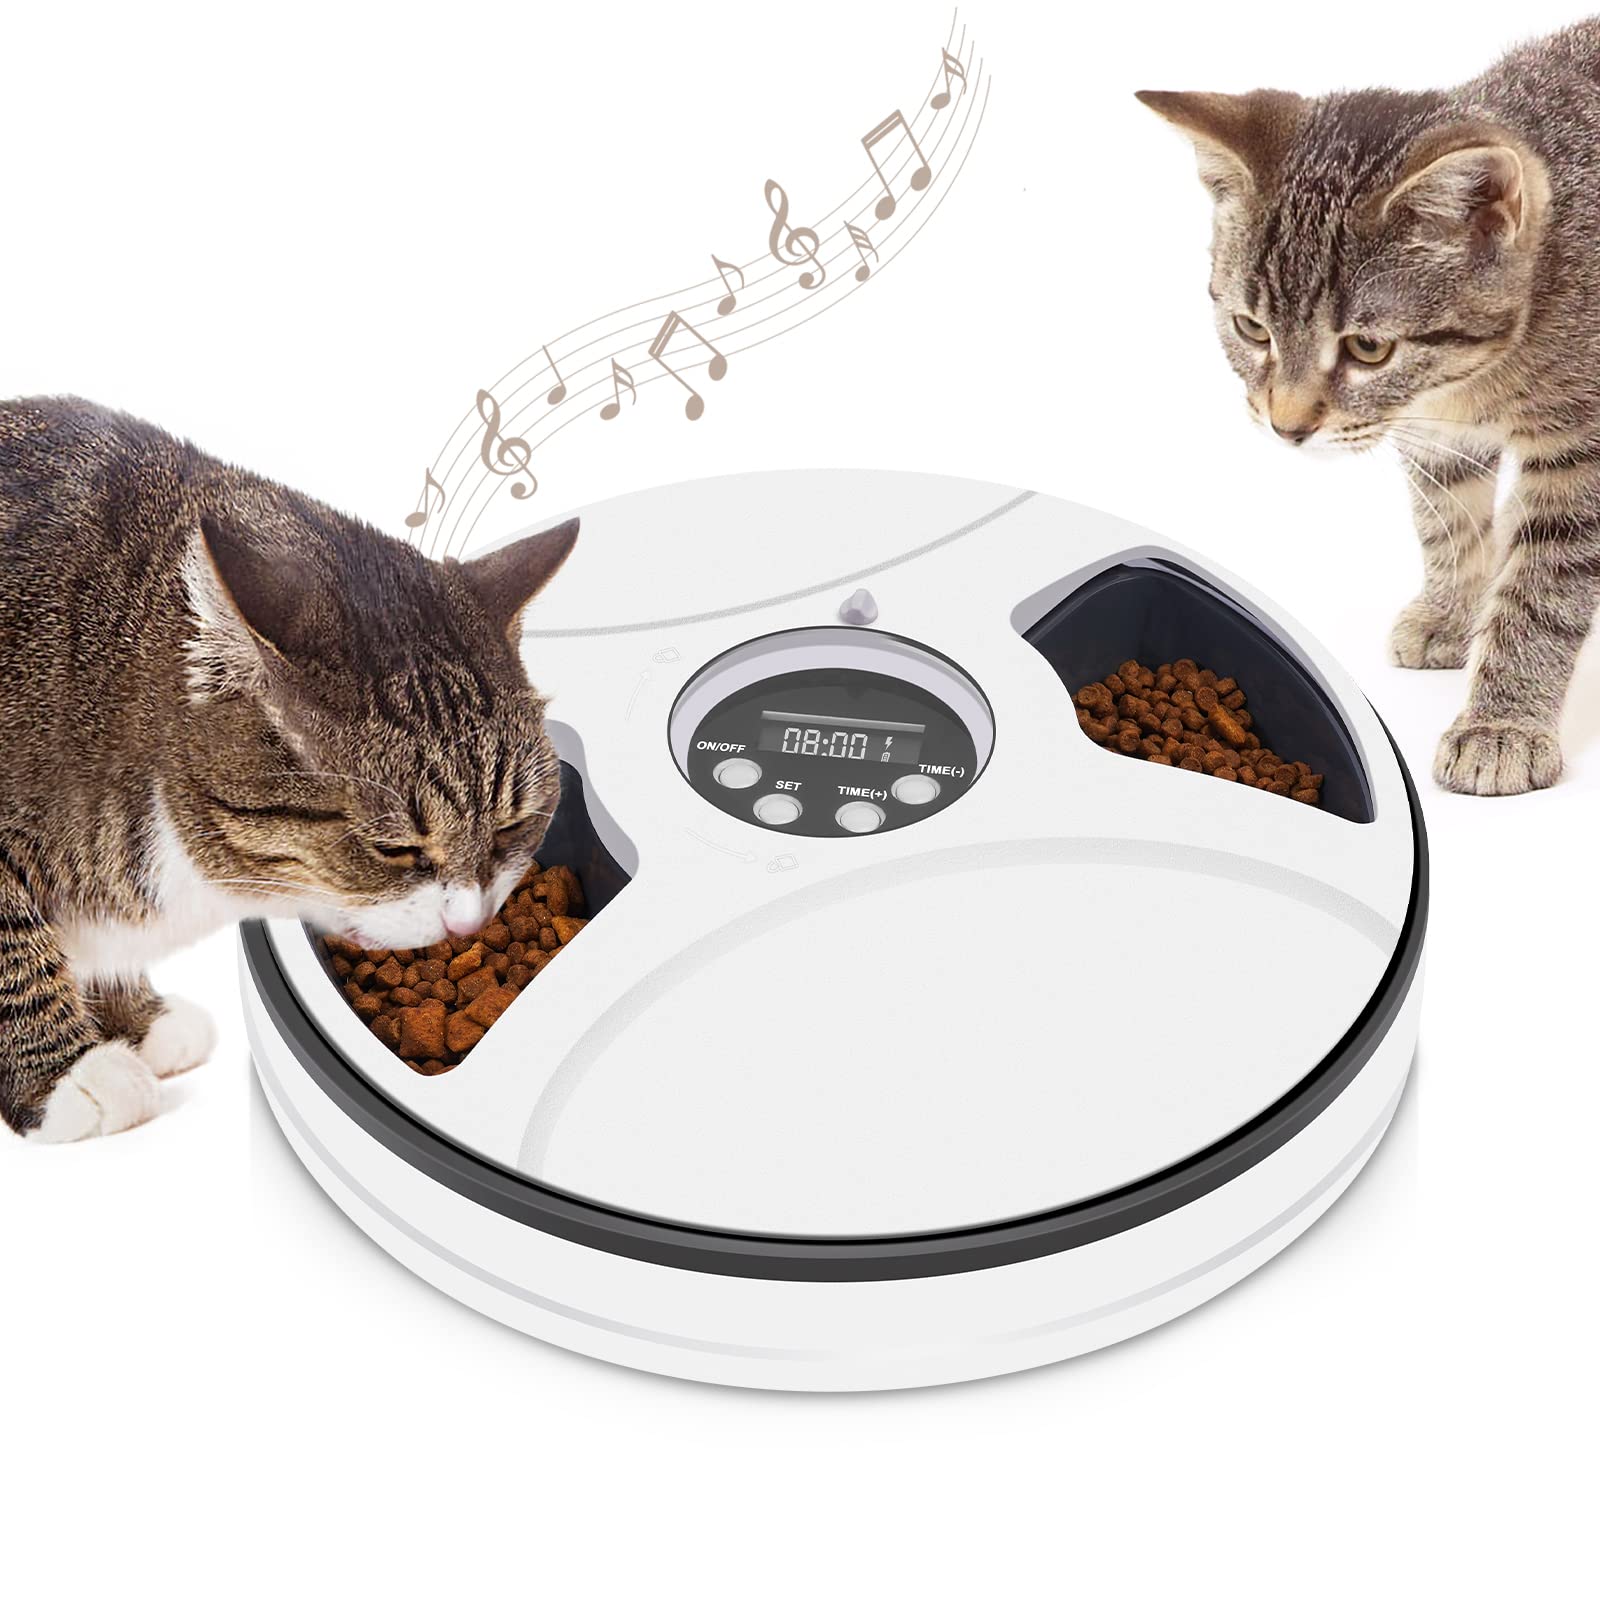 Cat lying next to automated feeder timer